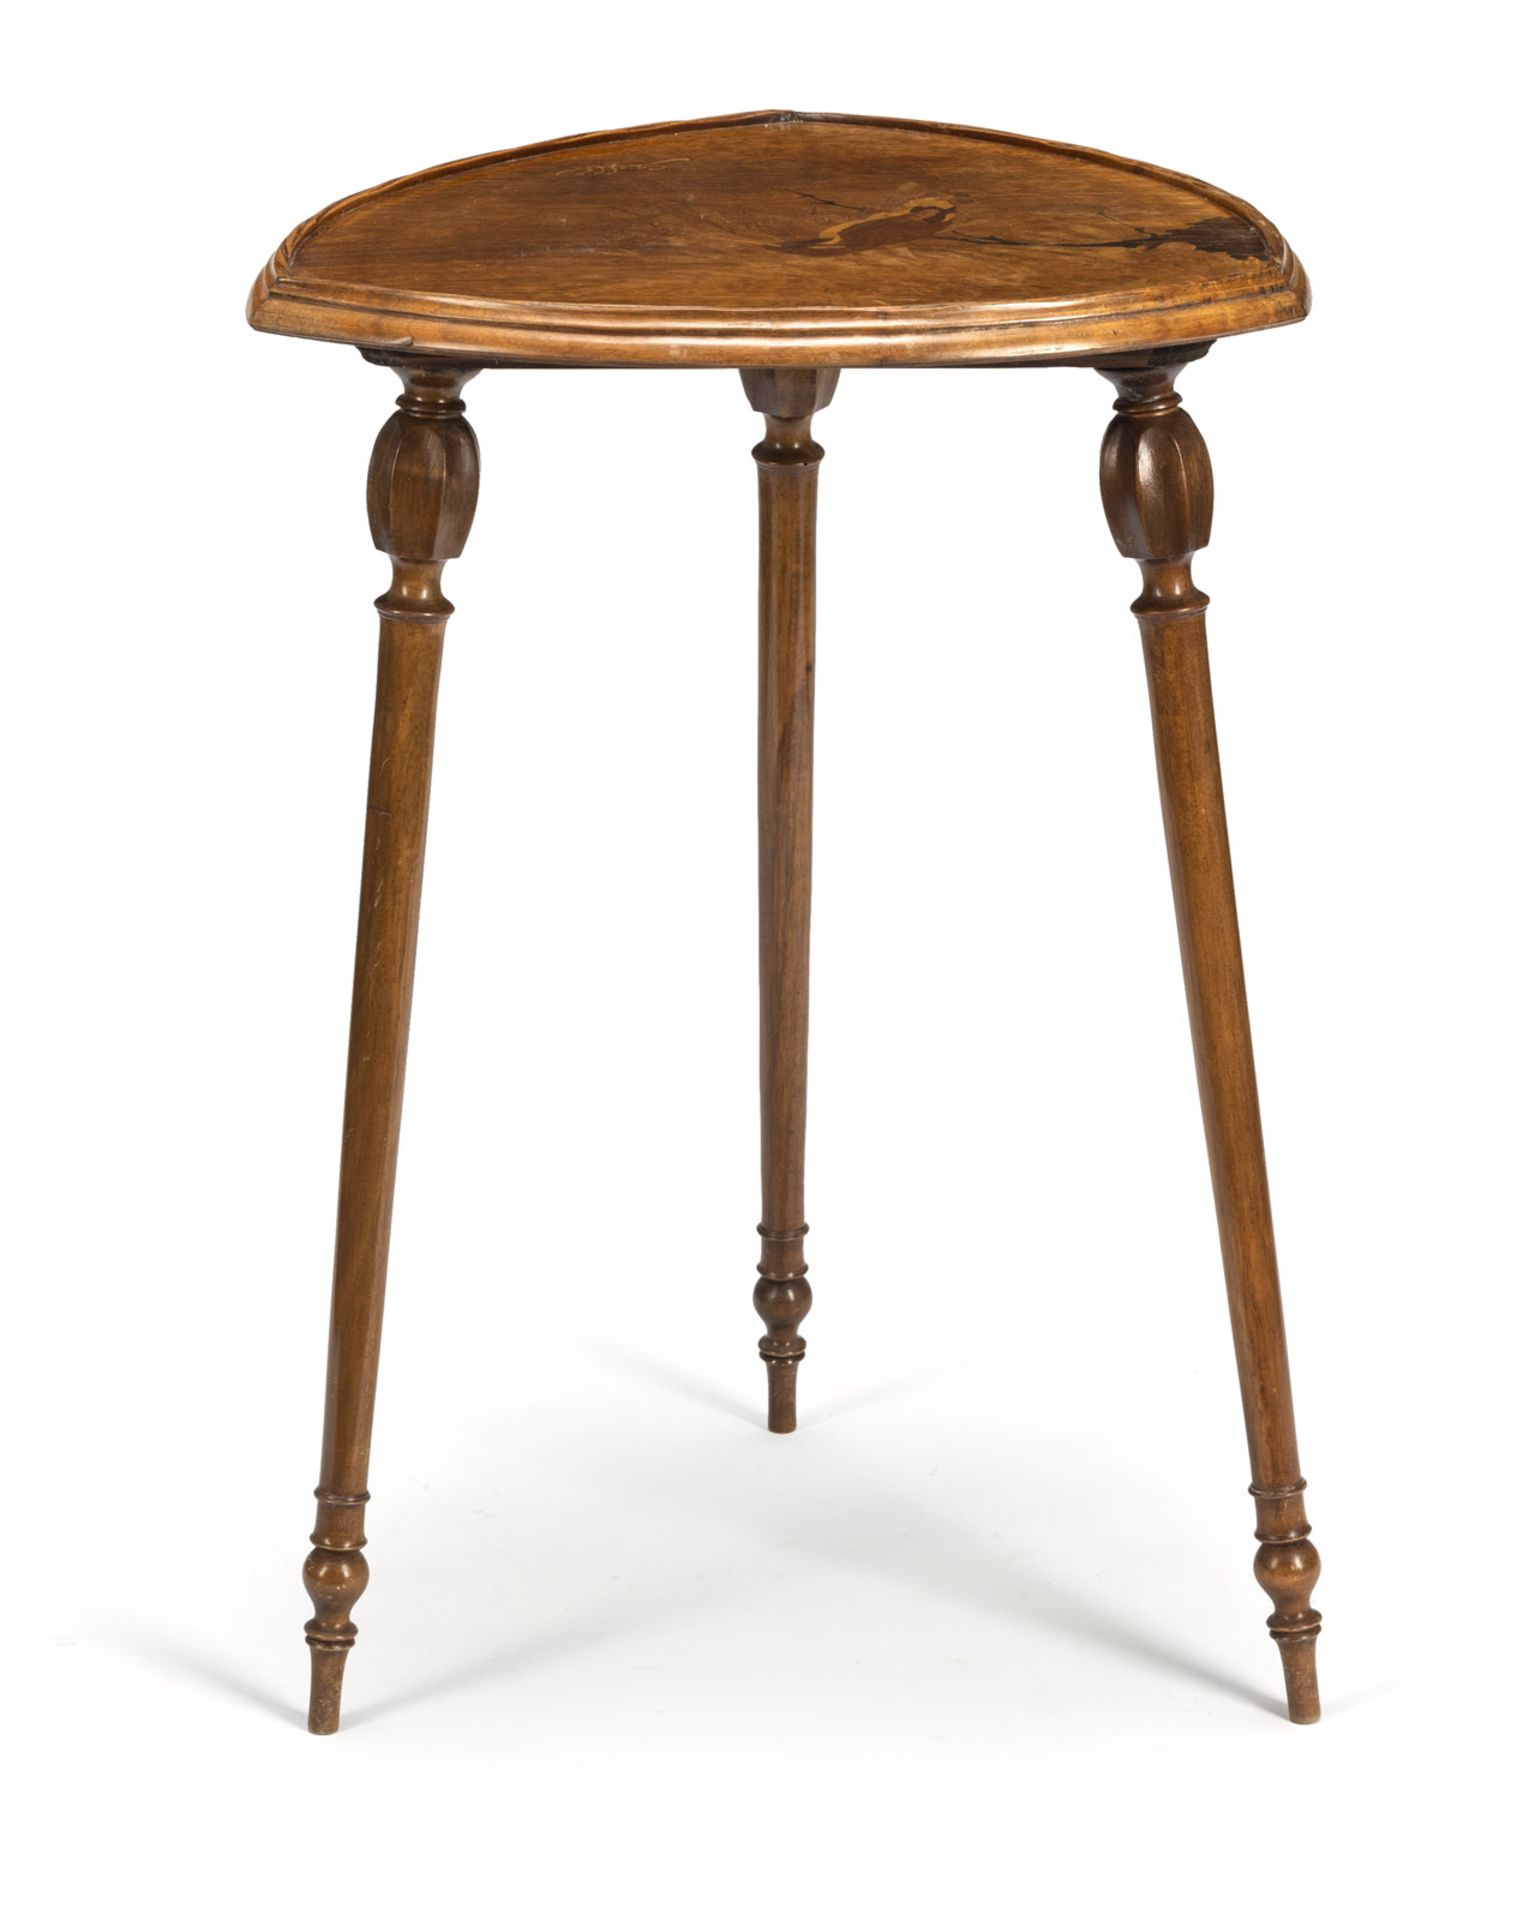 AN ART NOUVEAU WALNUT, MACASSAR AND MAHOGANY MARQUETRIED OCCASIONAL TABLE - Image 2 of 5